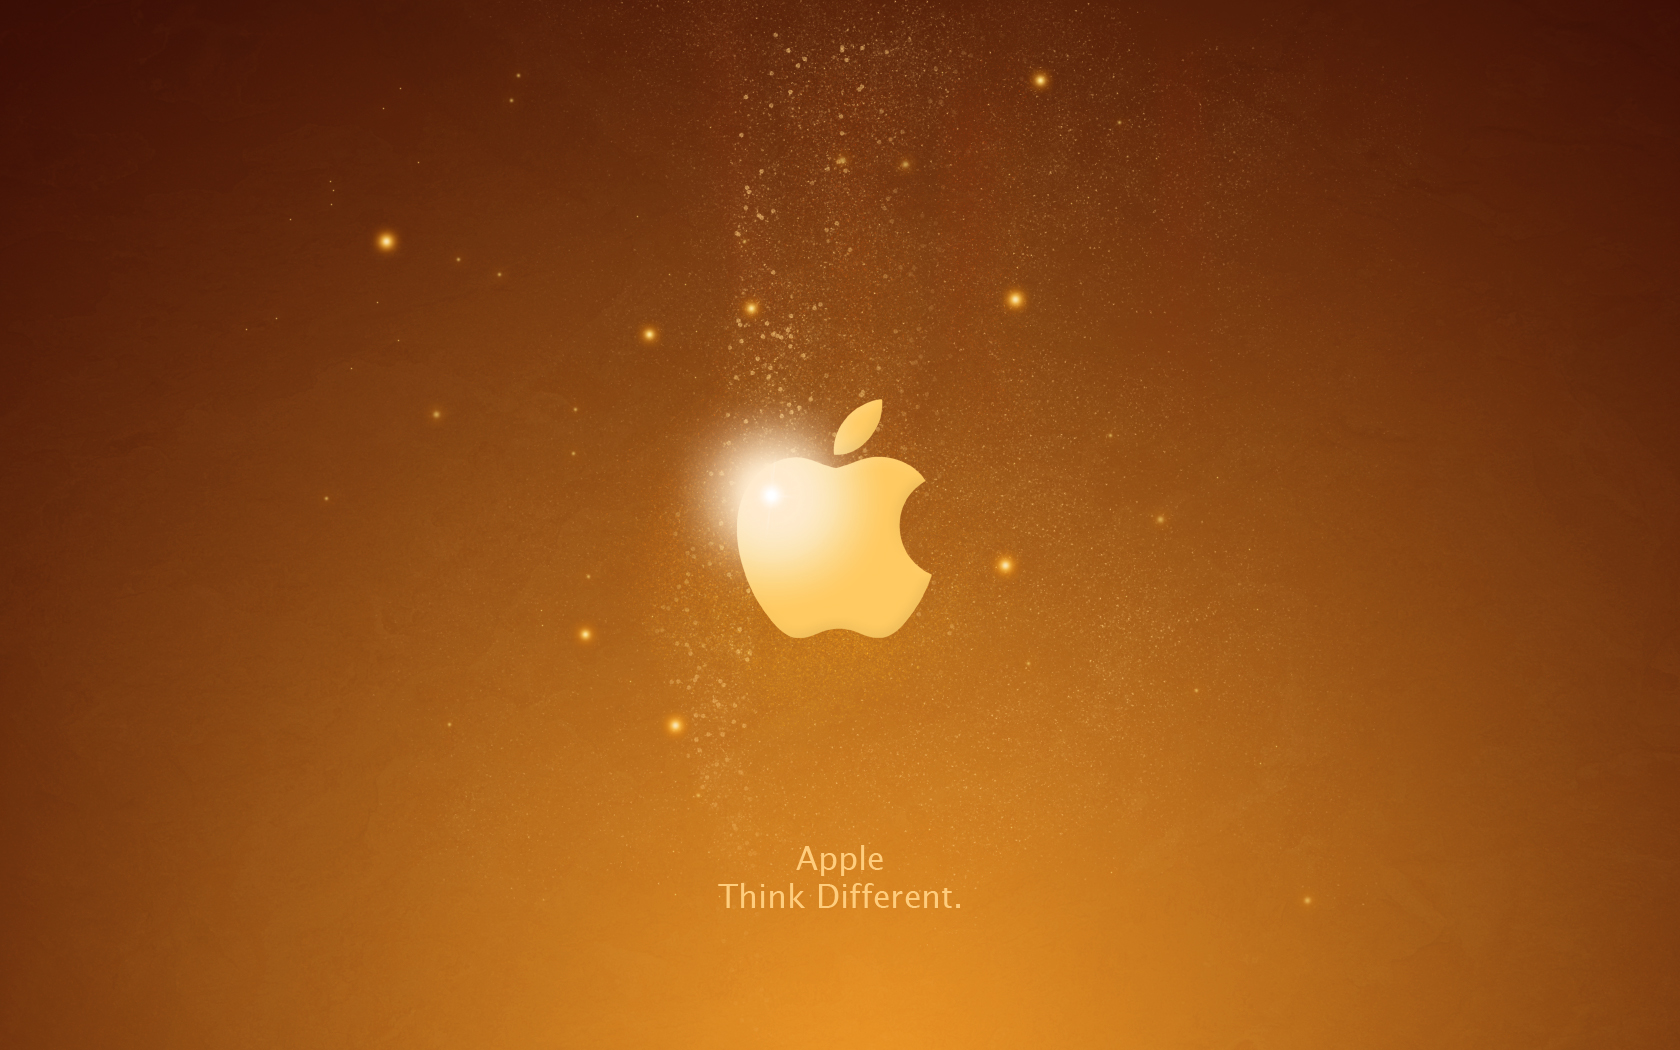 Apple tagg by FT69 on DeviantArt